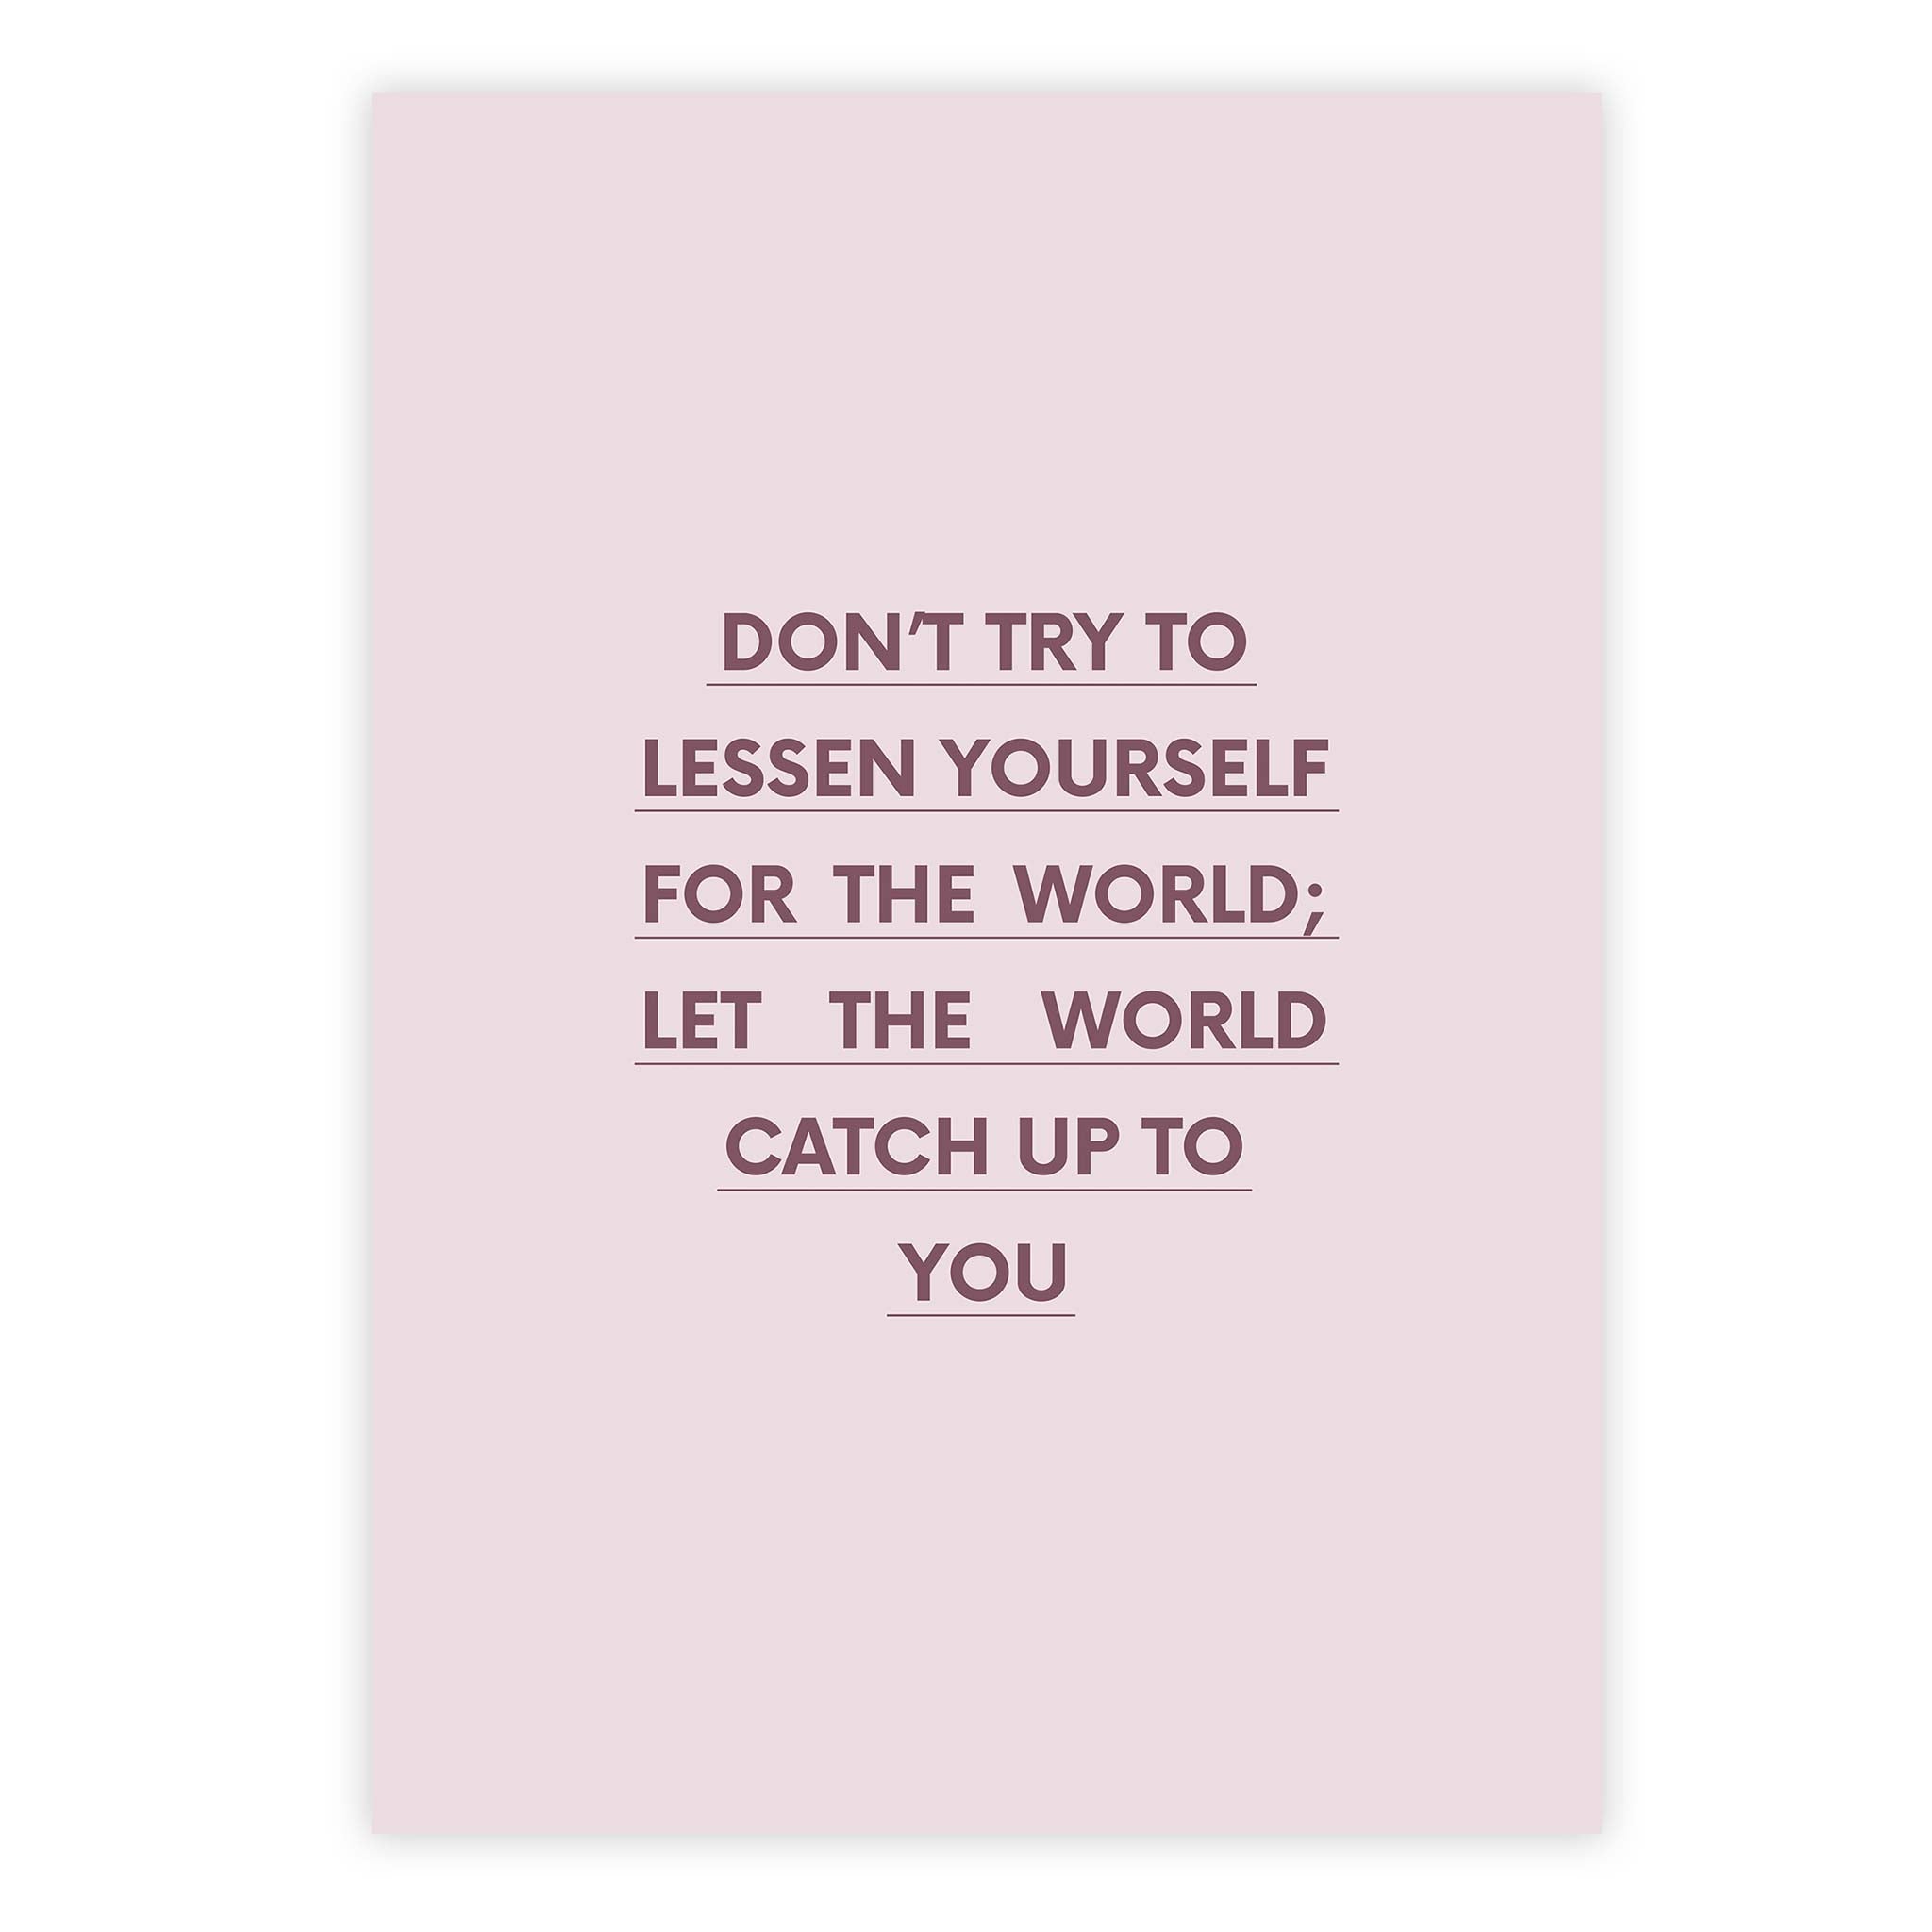 Don’t try to lessen yourself for the world; let the world catch up to you